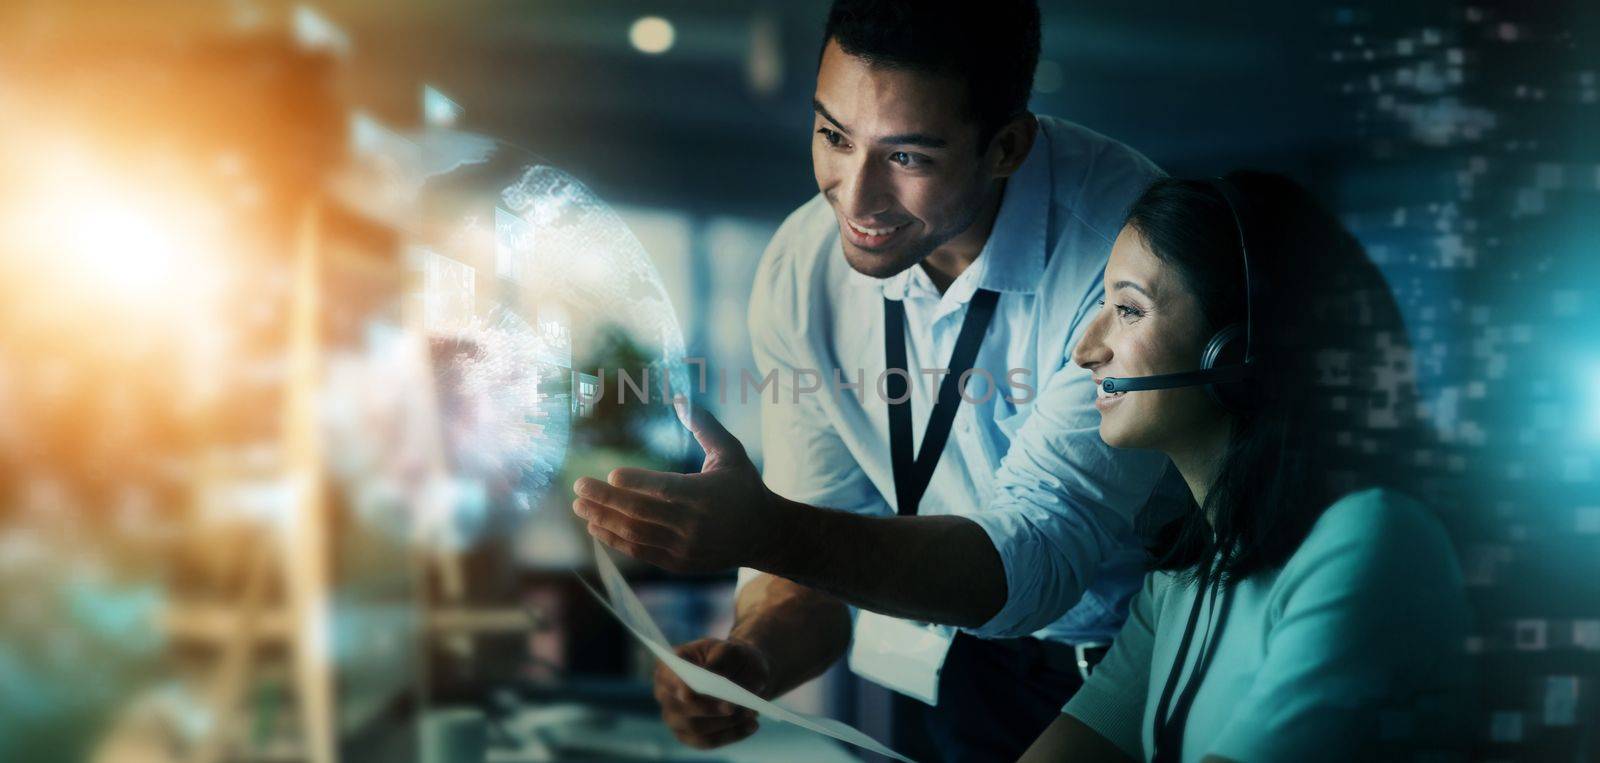 Digital marketing, team and telemarketing in call center for future networking at night in double exposure. Business people or consultants smiling for big data, innovation or global communication by YuriArcurs